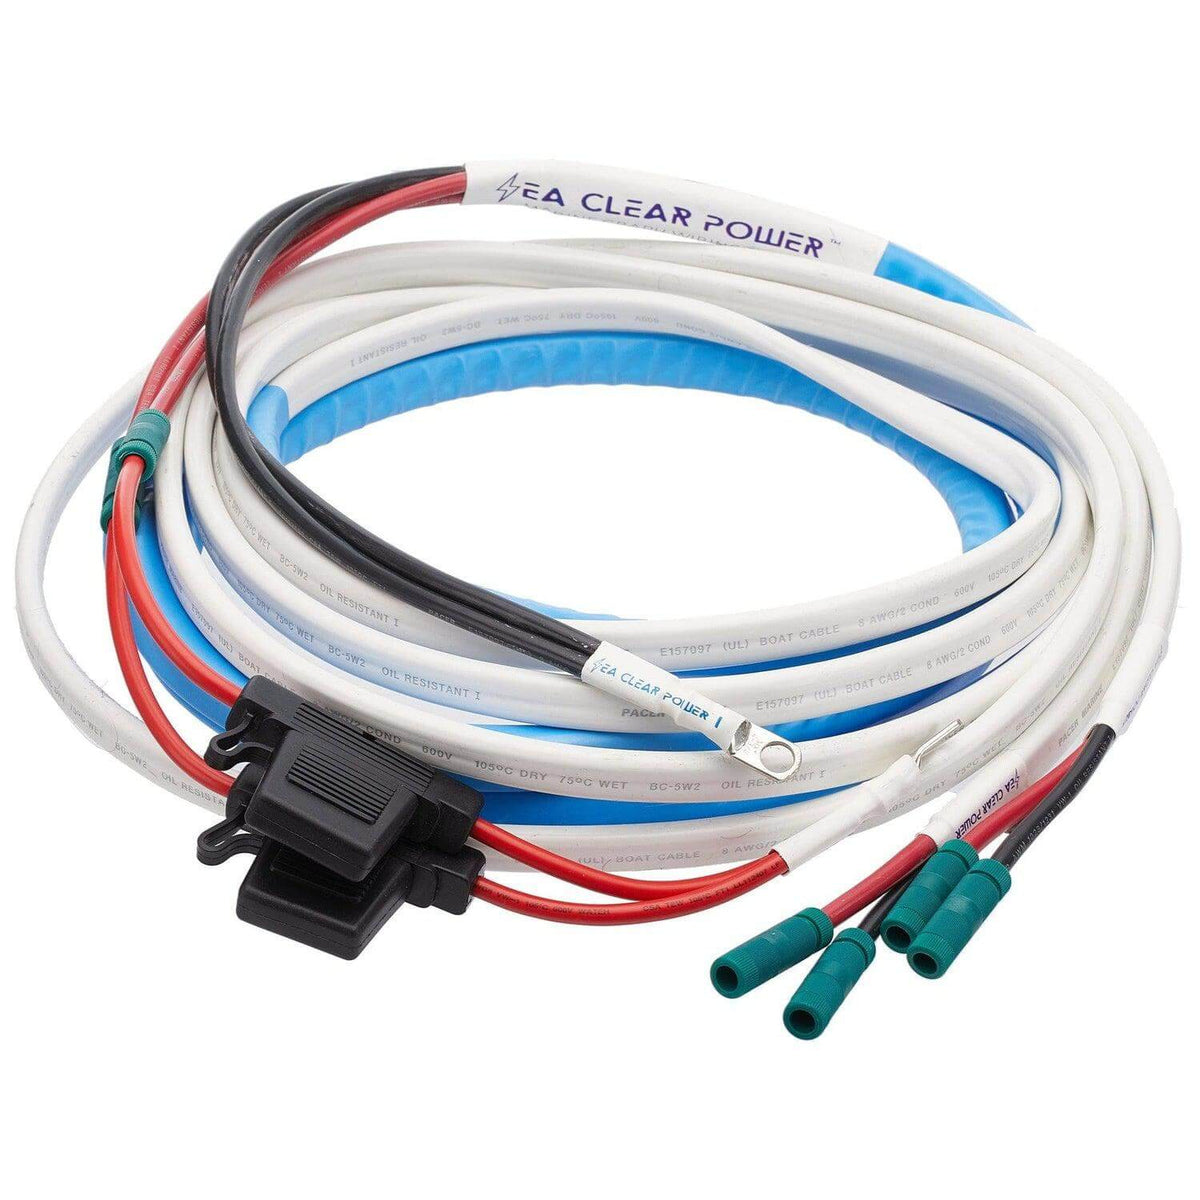 View of electronic_accessories Sea Clear Power Marine Graph Wiring Harness available at EZOKO Pike and Musky Shop